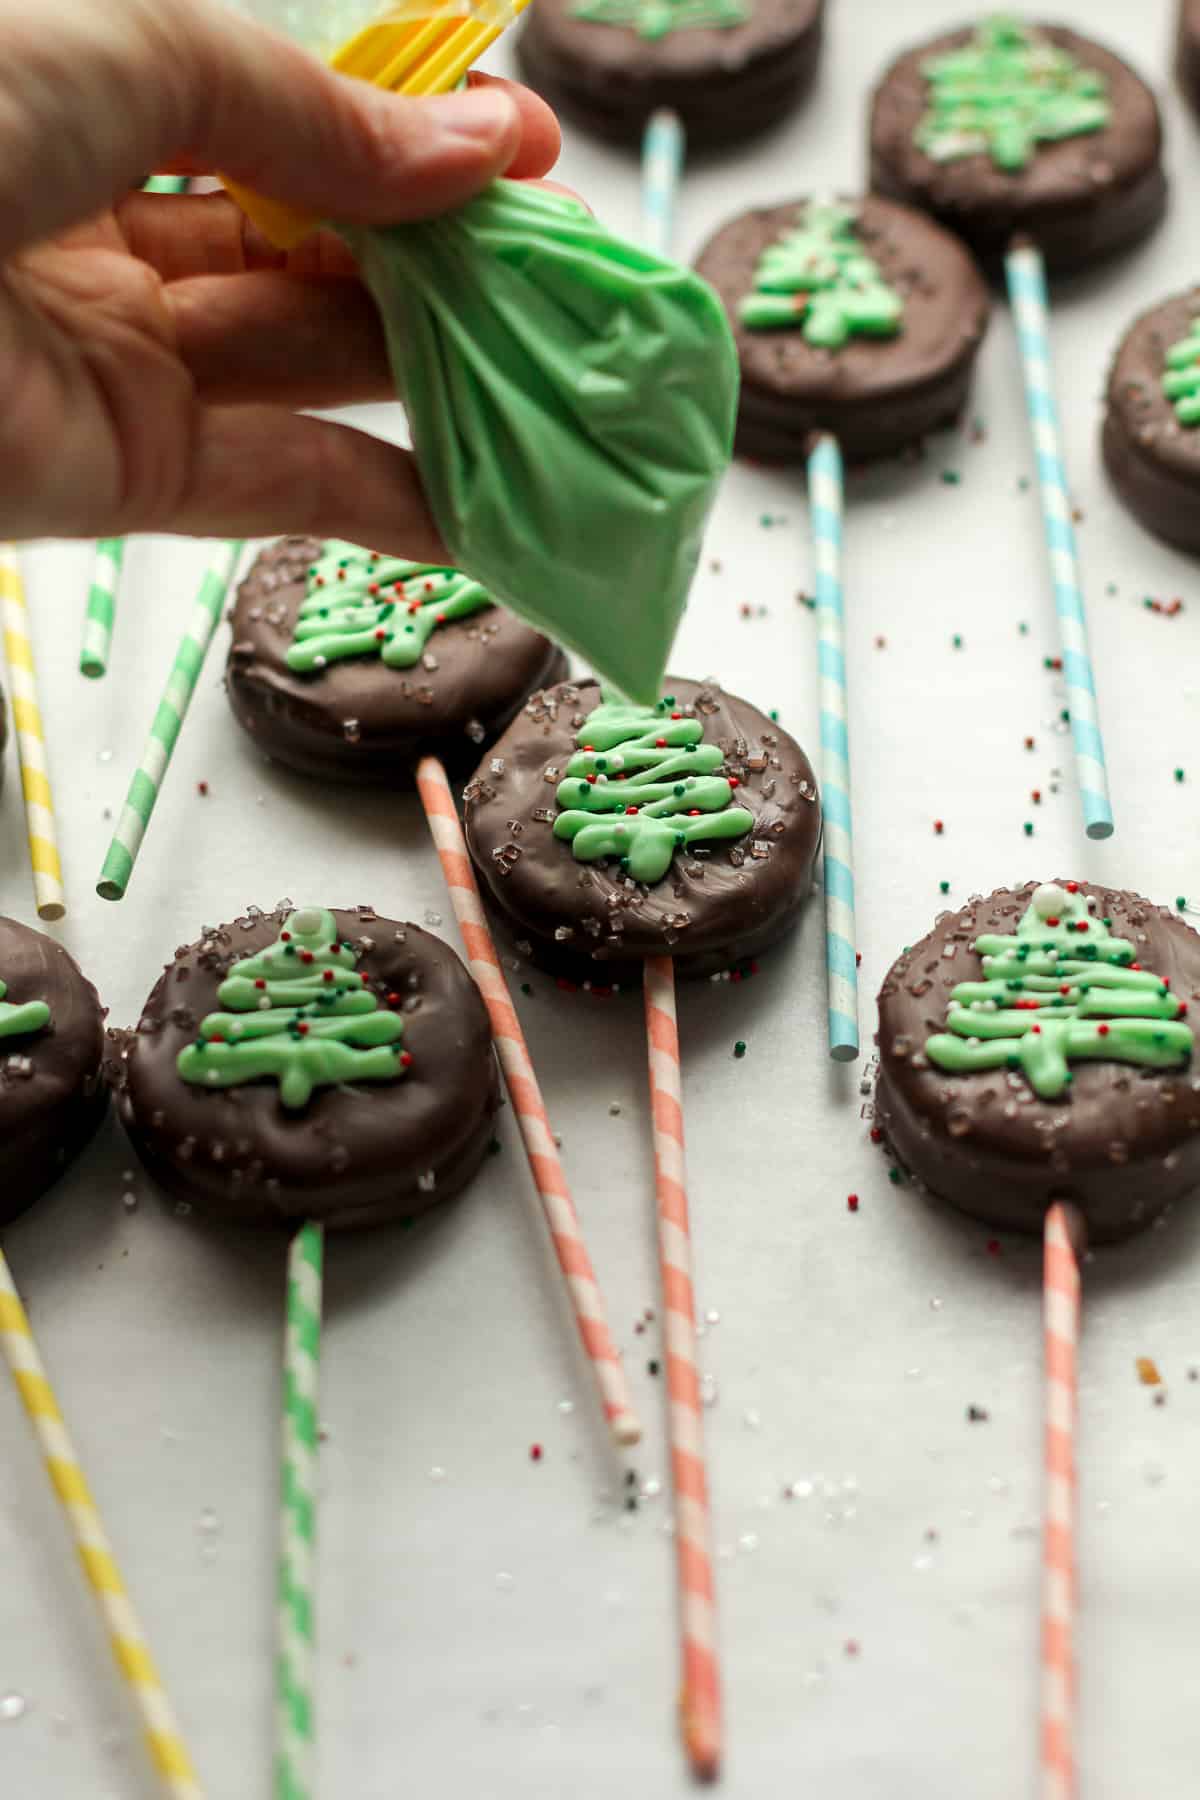 A sheet pan of the ritz pops with my hand holding the green decorating chocolate in a bag.